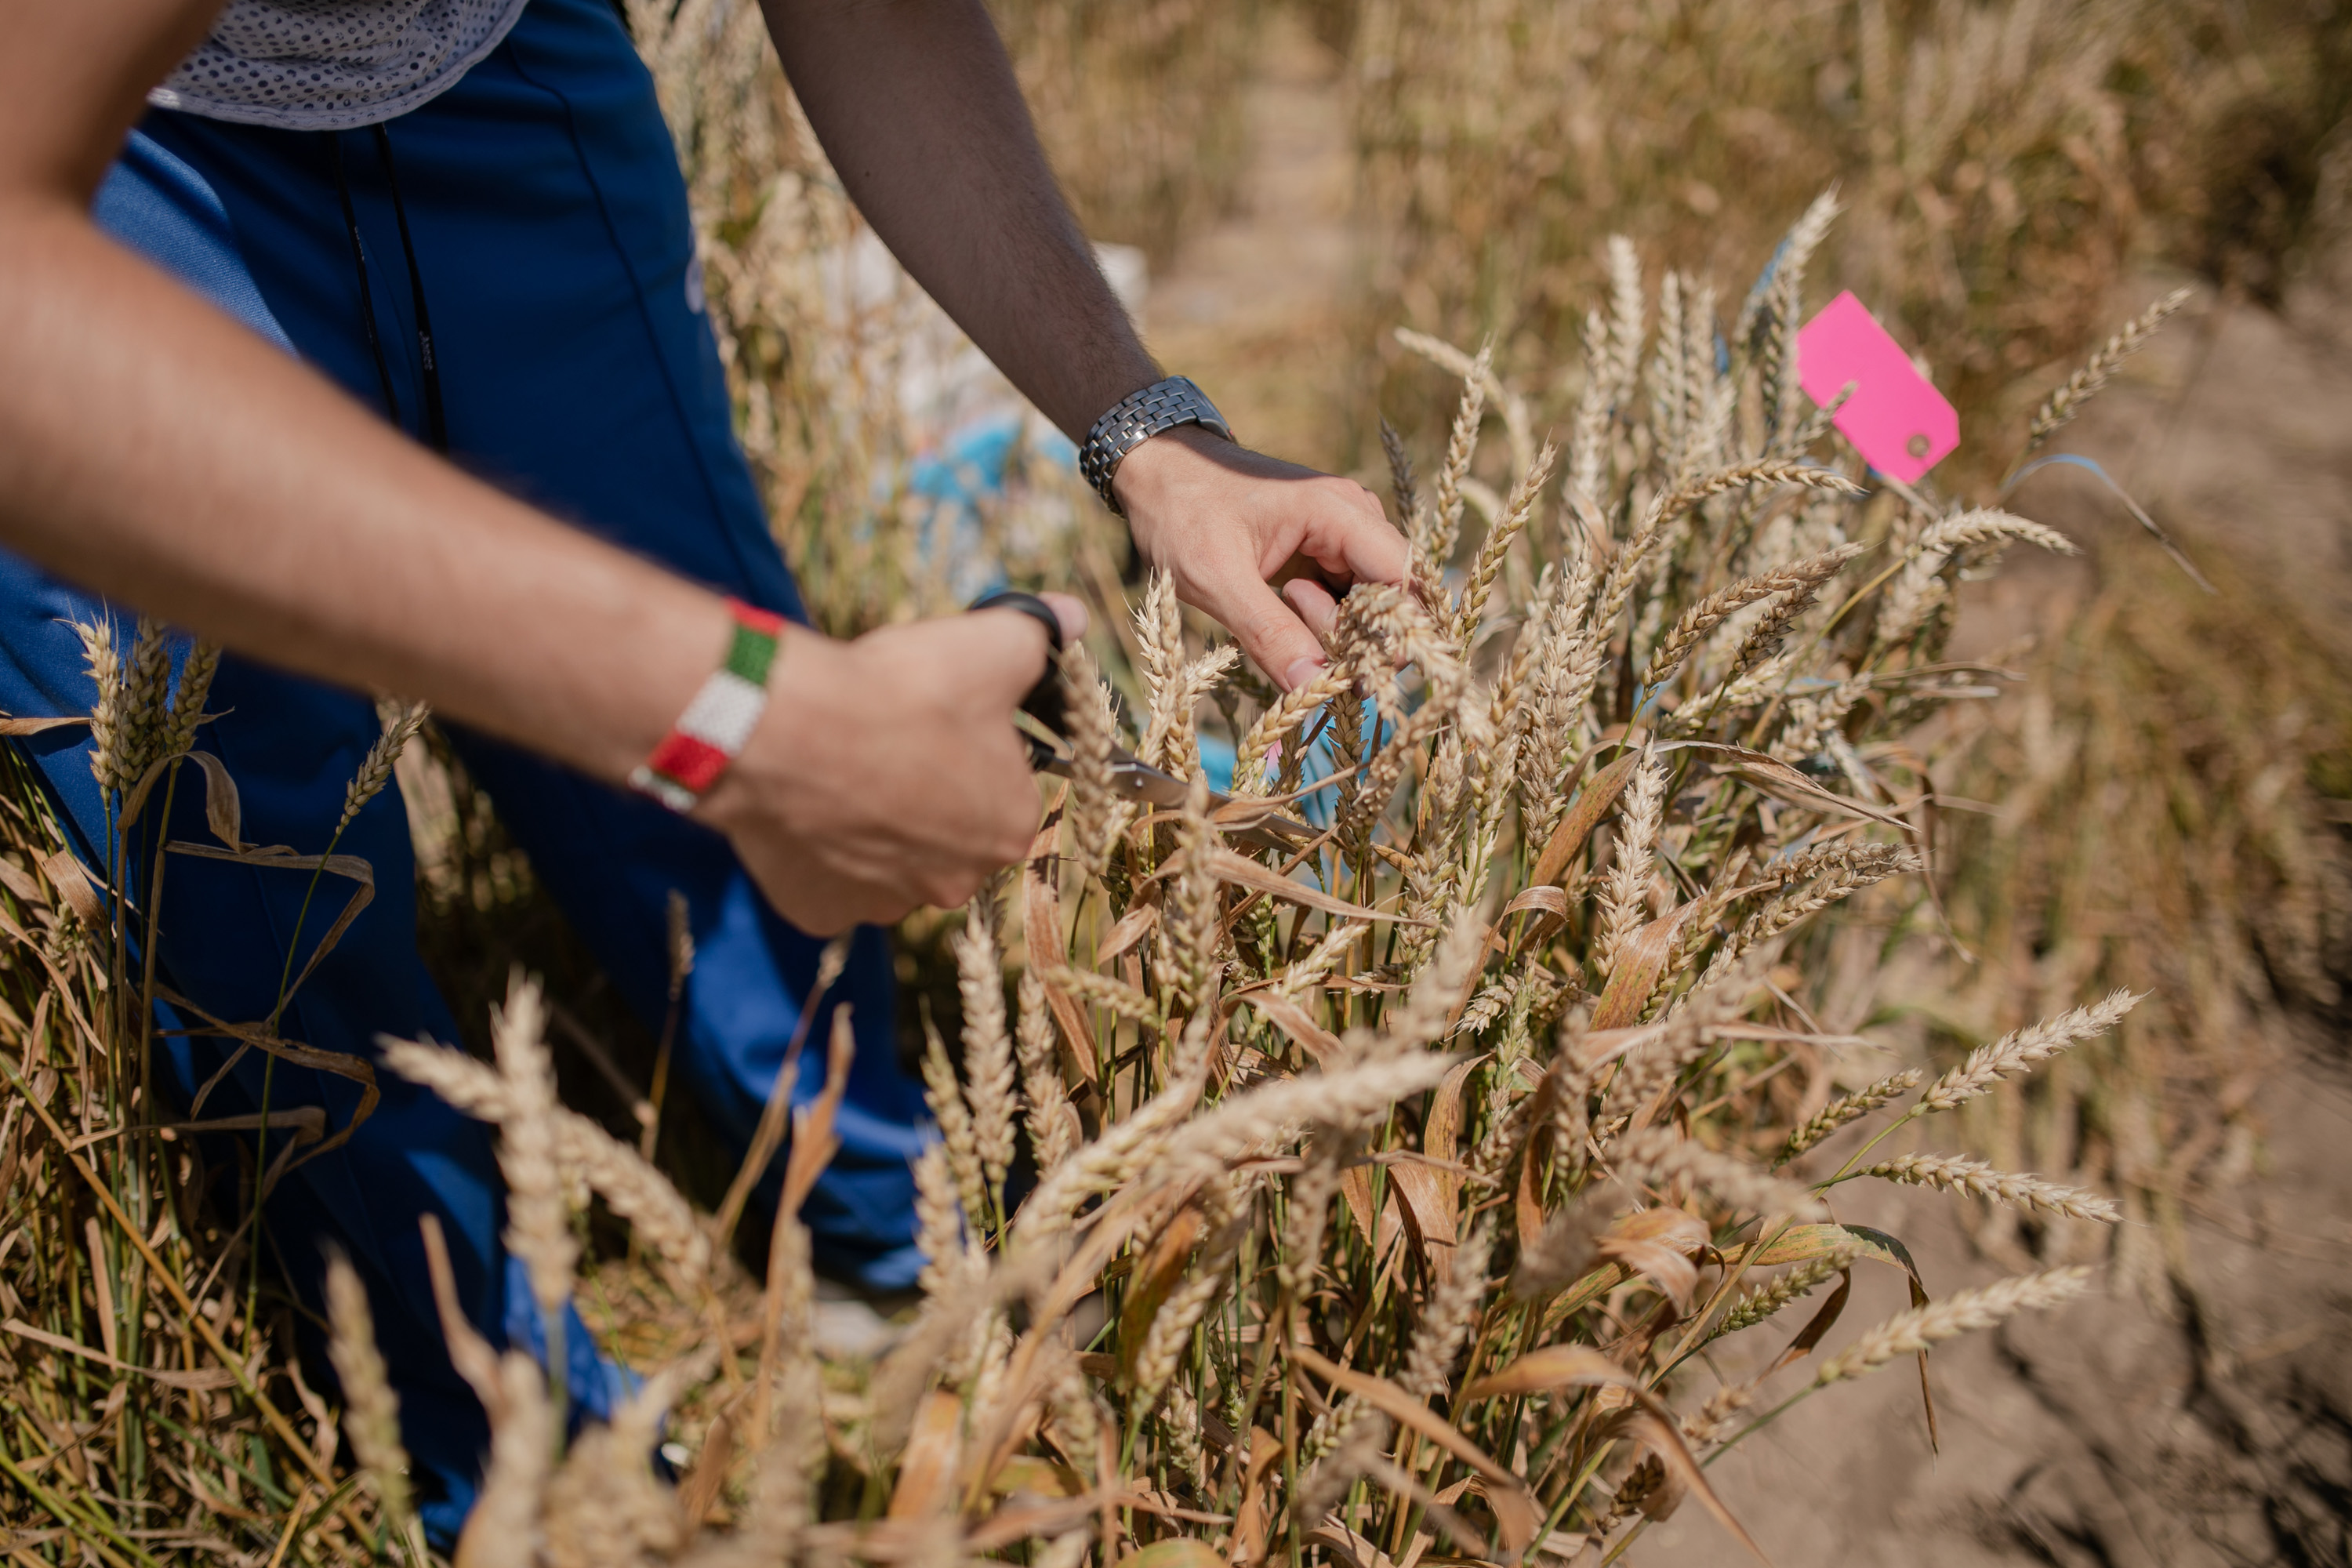 A KWS employee cuts wheat with scissors and collects the wheat for further plant breeding.